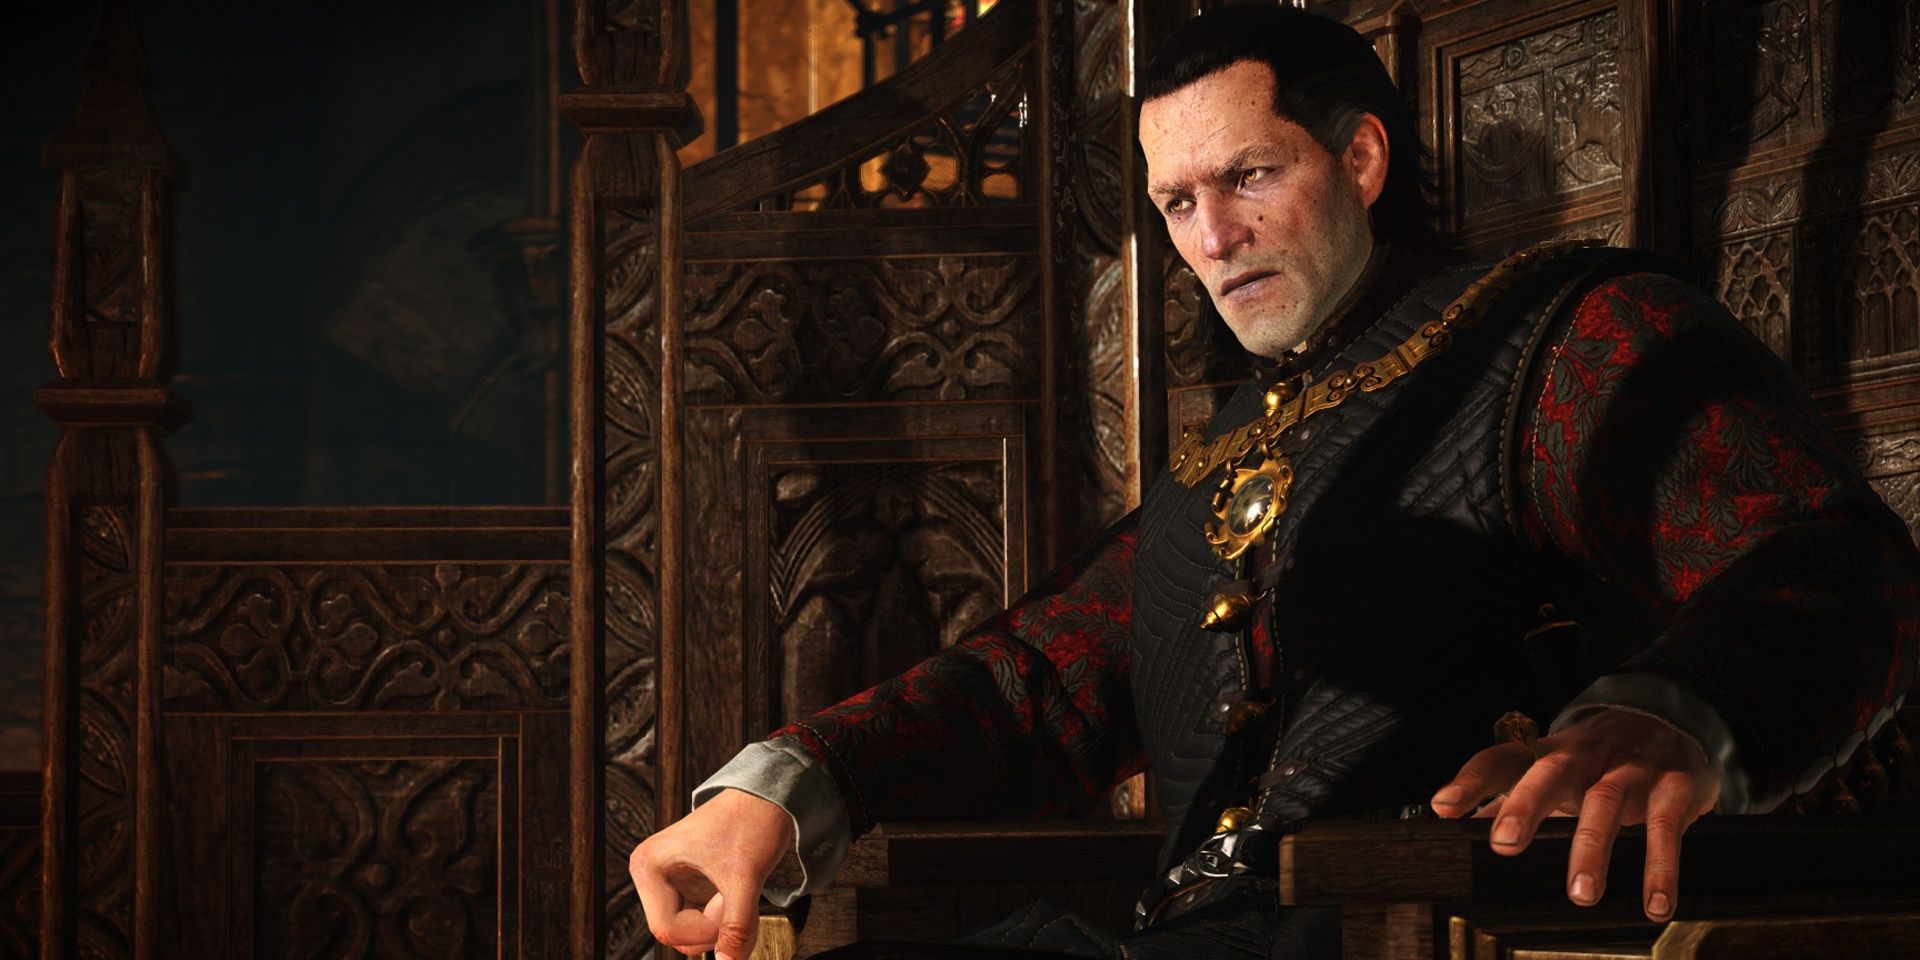 Emhry as he appears in The Witcher 3